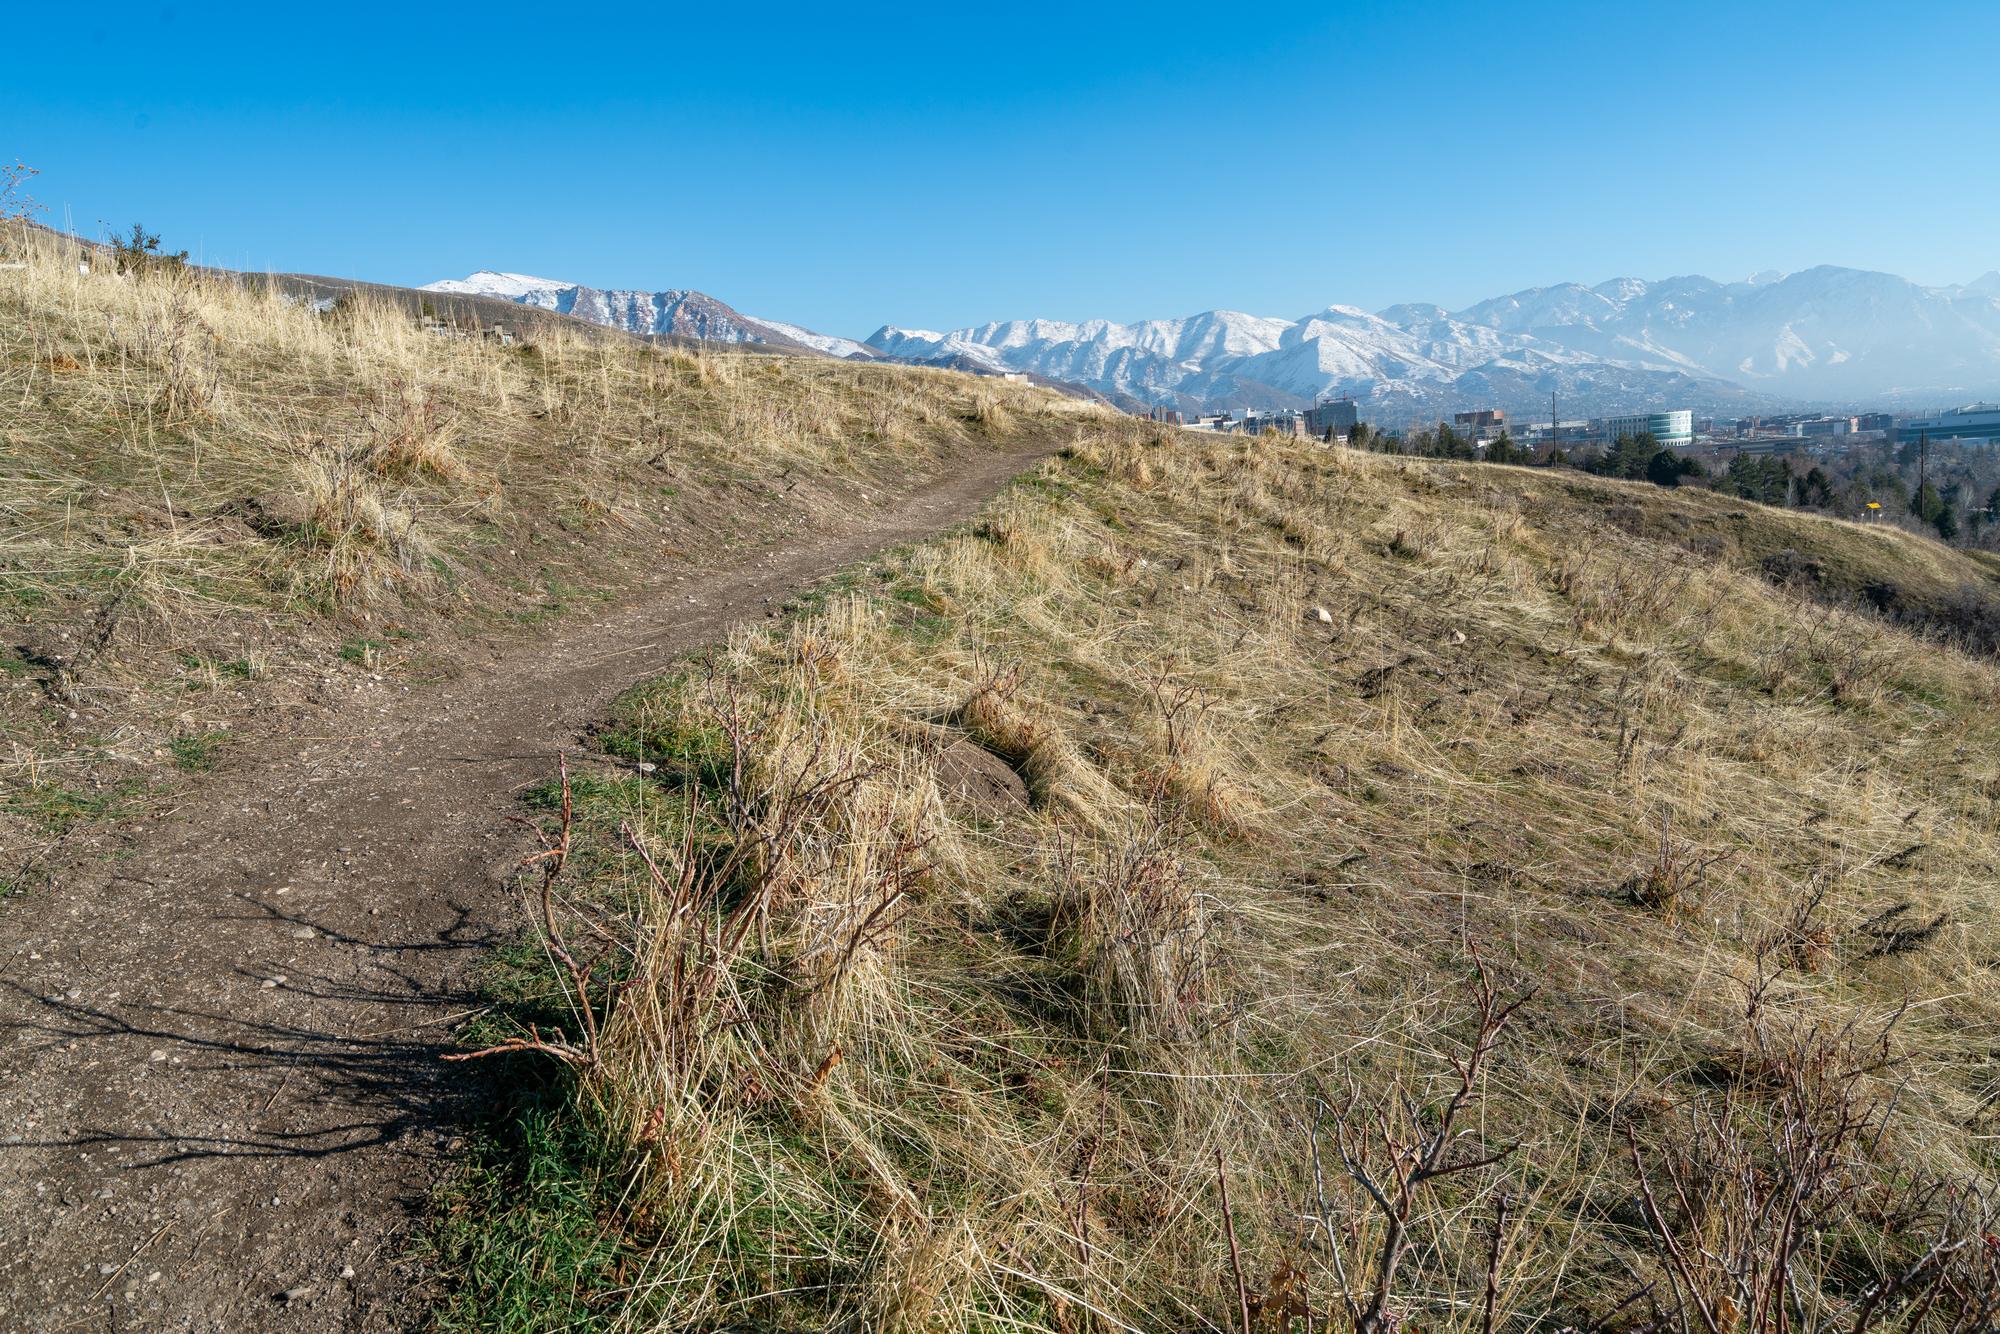 Winding trail of West Popperton Hiking Loop with Wasatch Mountains in the background.